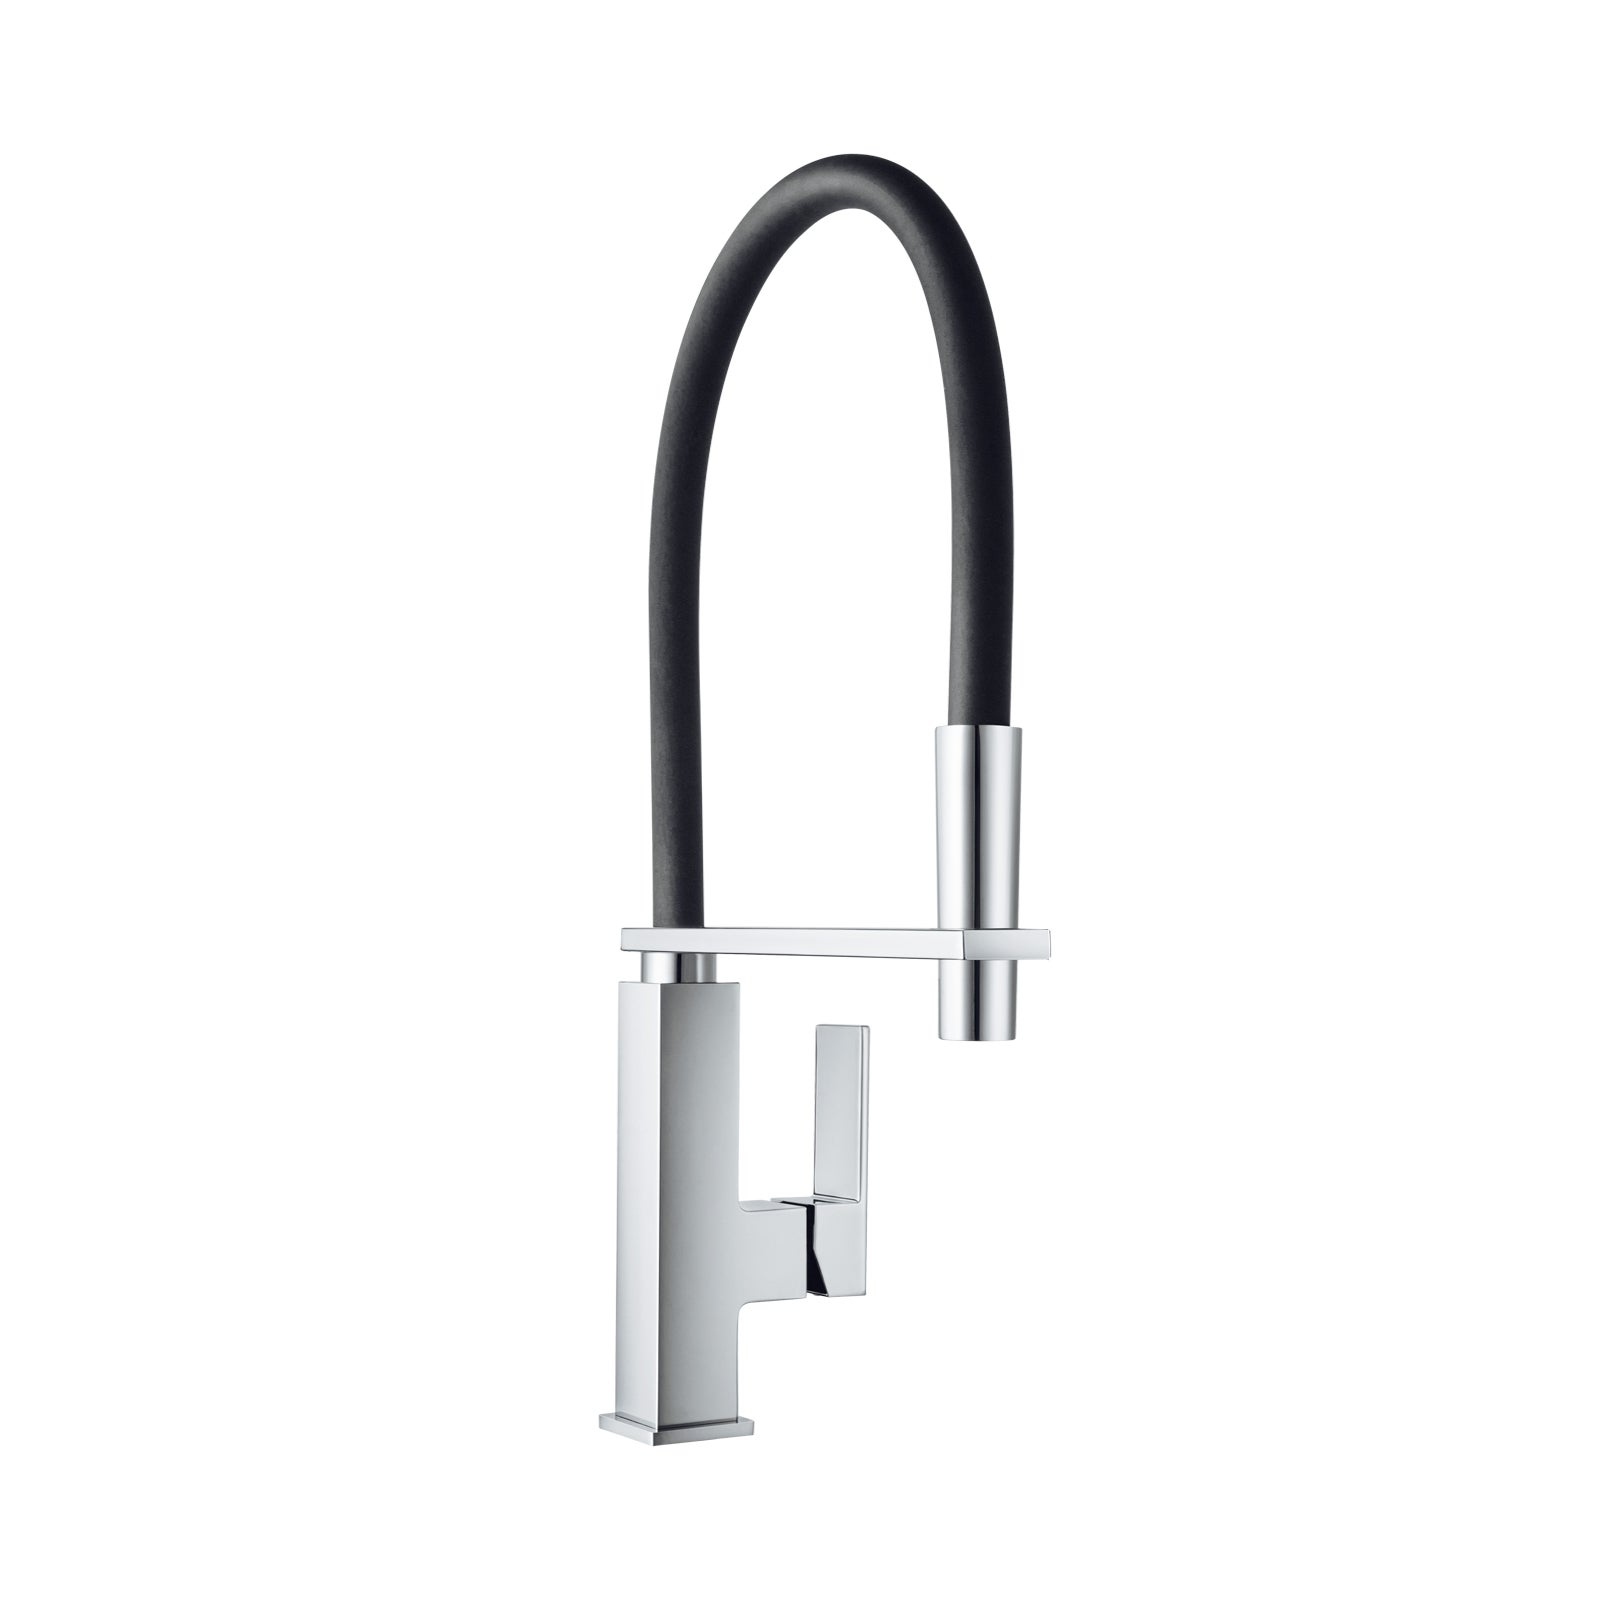 ACA Kitchen Tap Pull Out Rubber Spout Mixer Tap Sink Chrome Faucet Watermark WELS